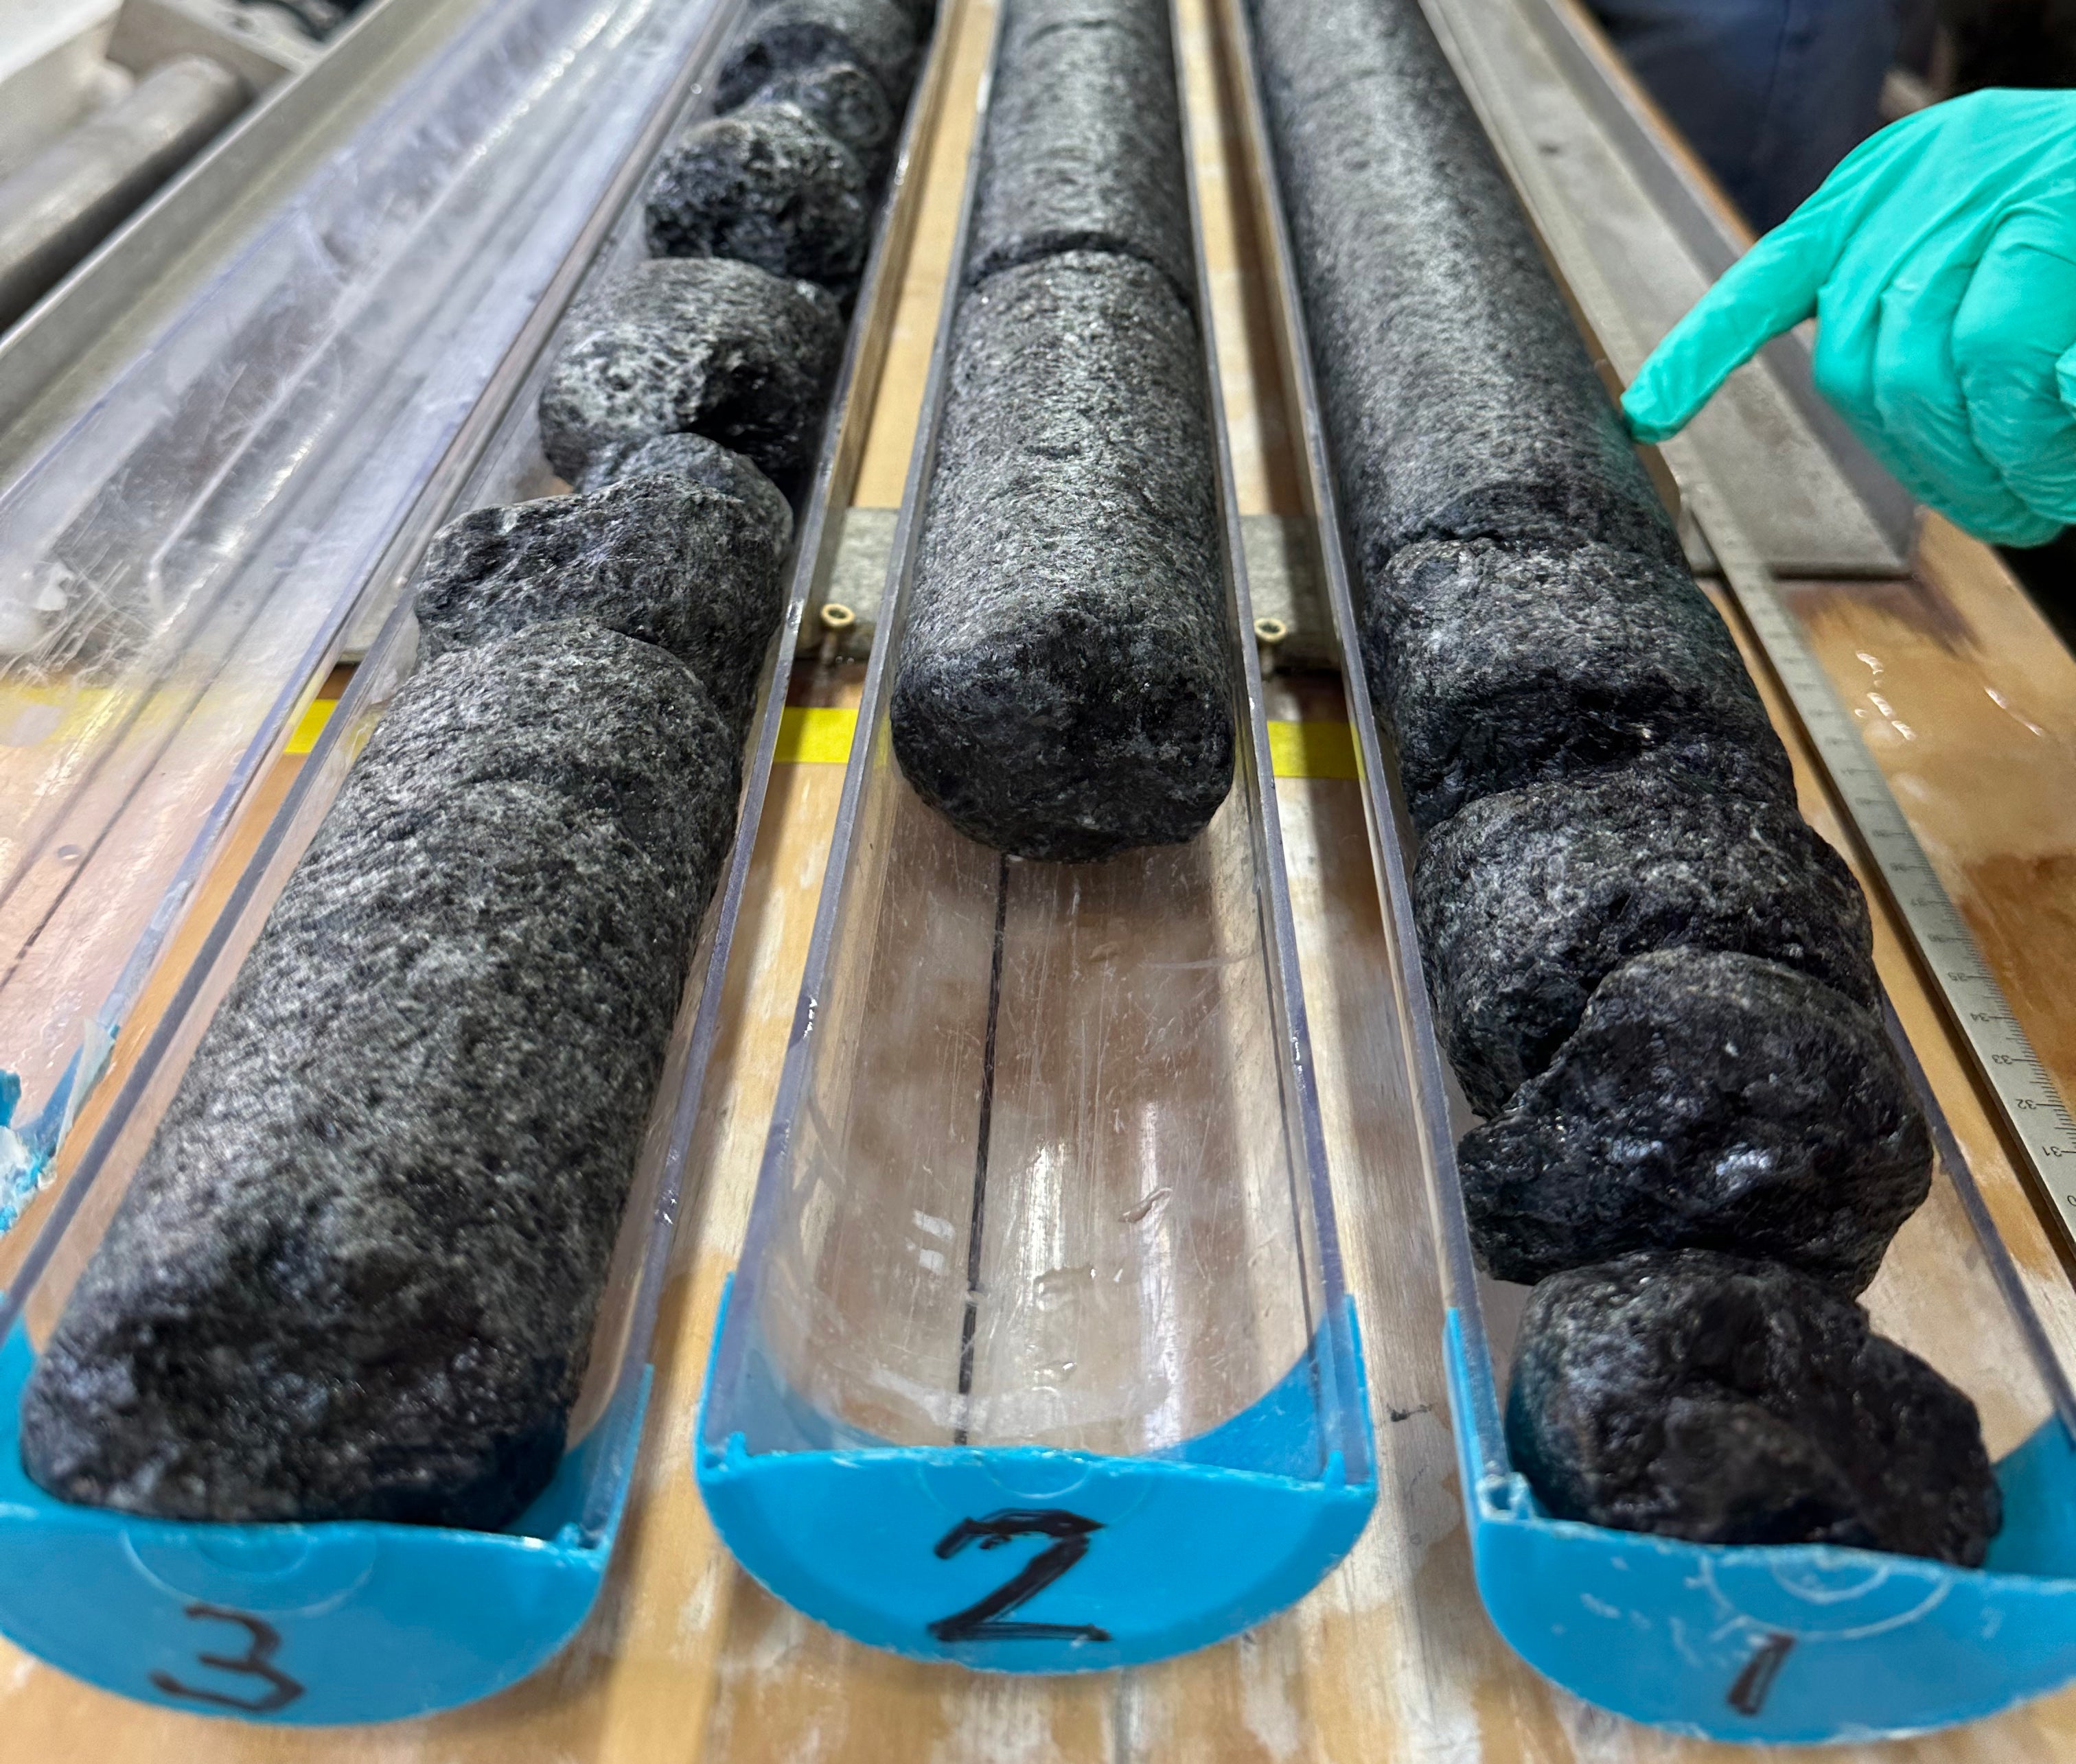 Aboard the Joides Resolution research vessel, team members process samples of mantle rock recovered from a more than 4,100ft-deep hole drilled into the seabed of the North Atlantic